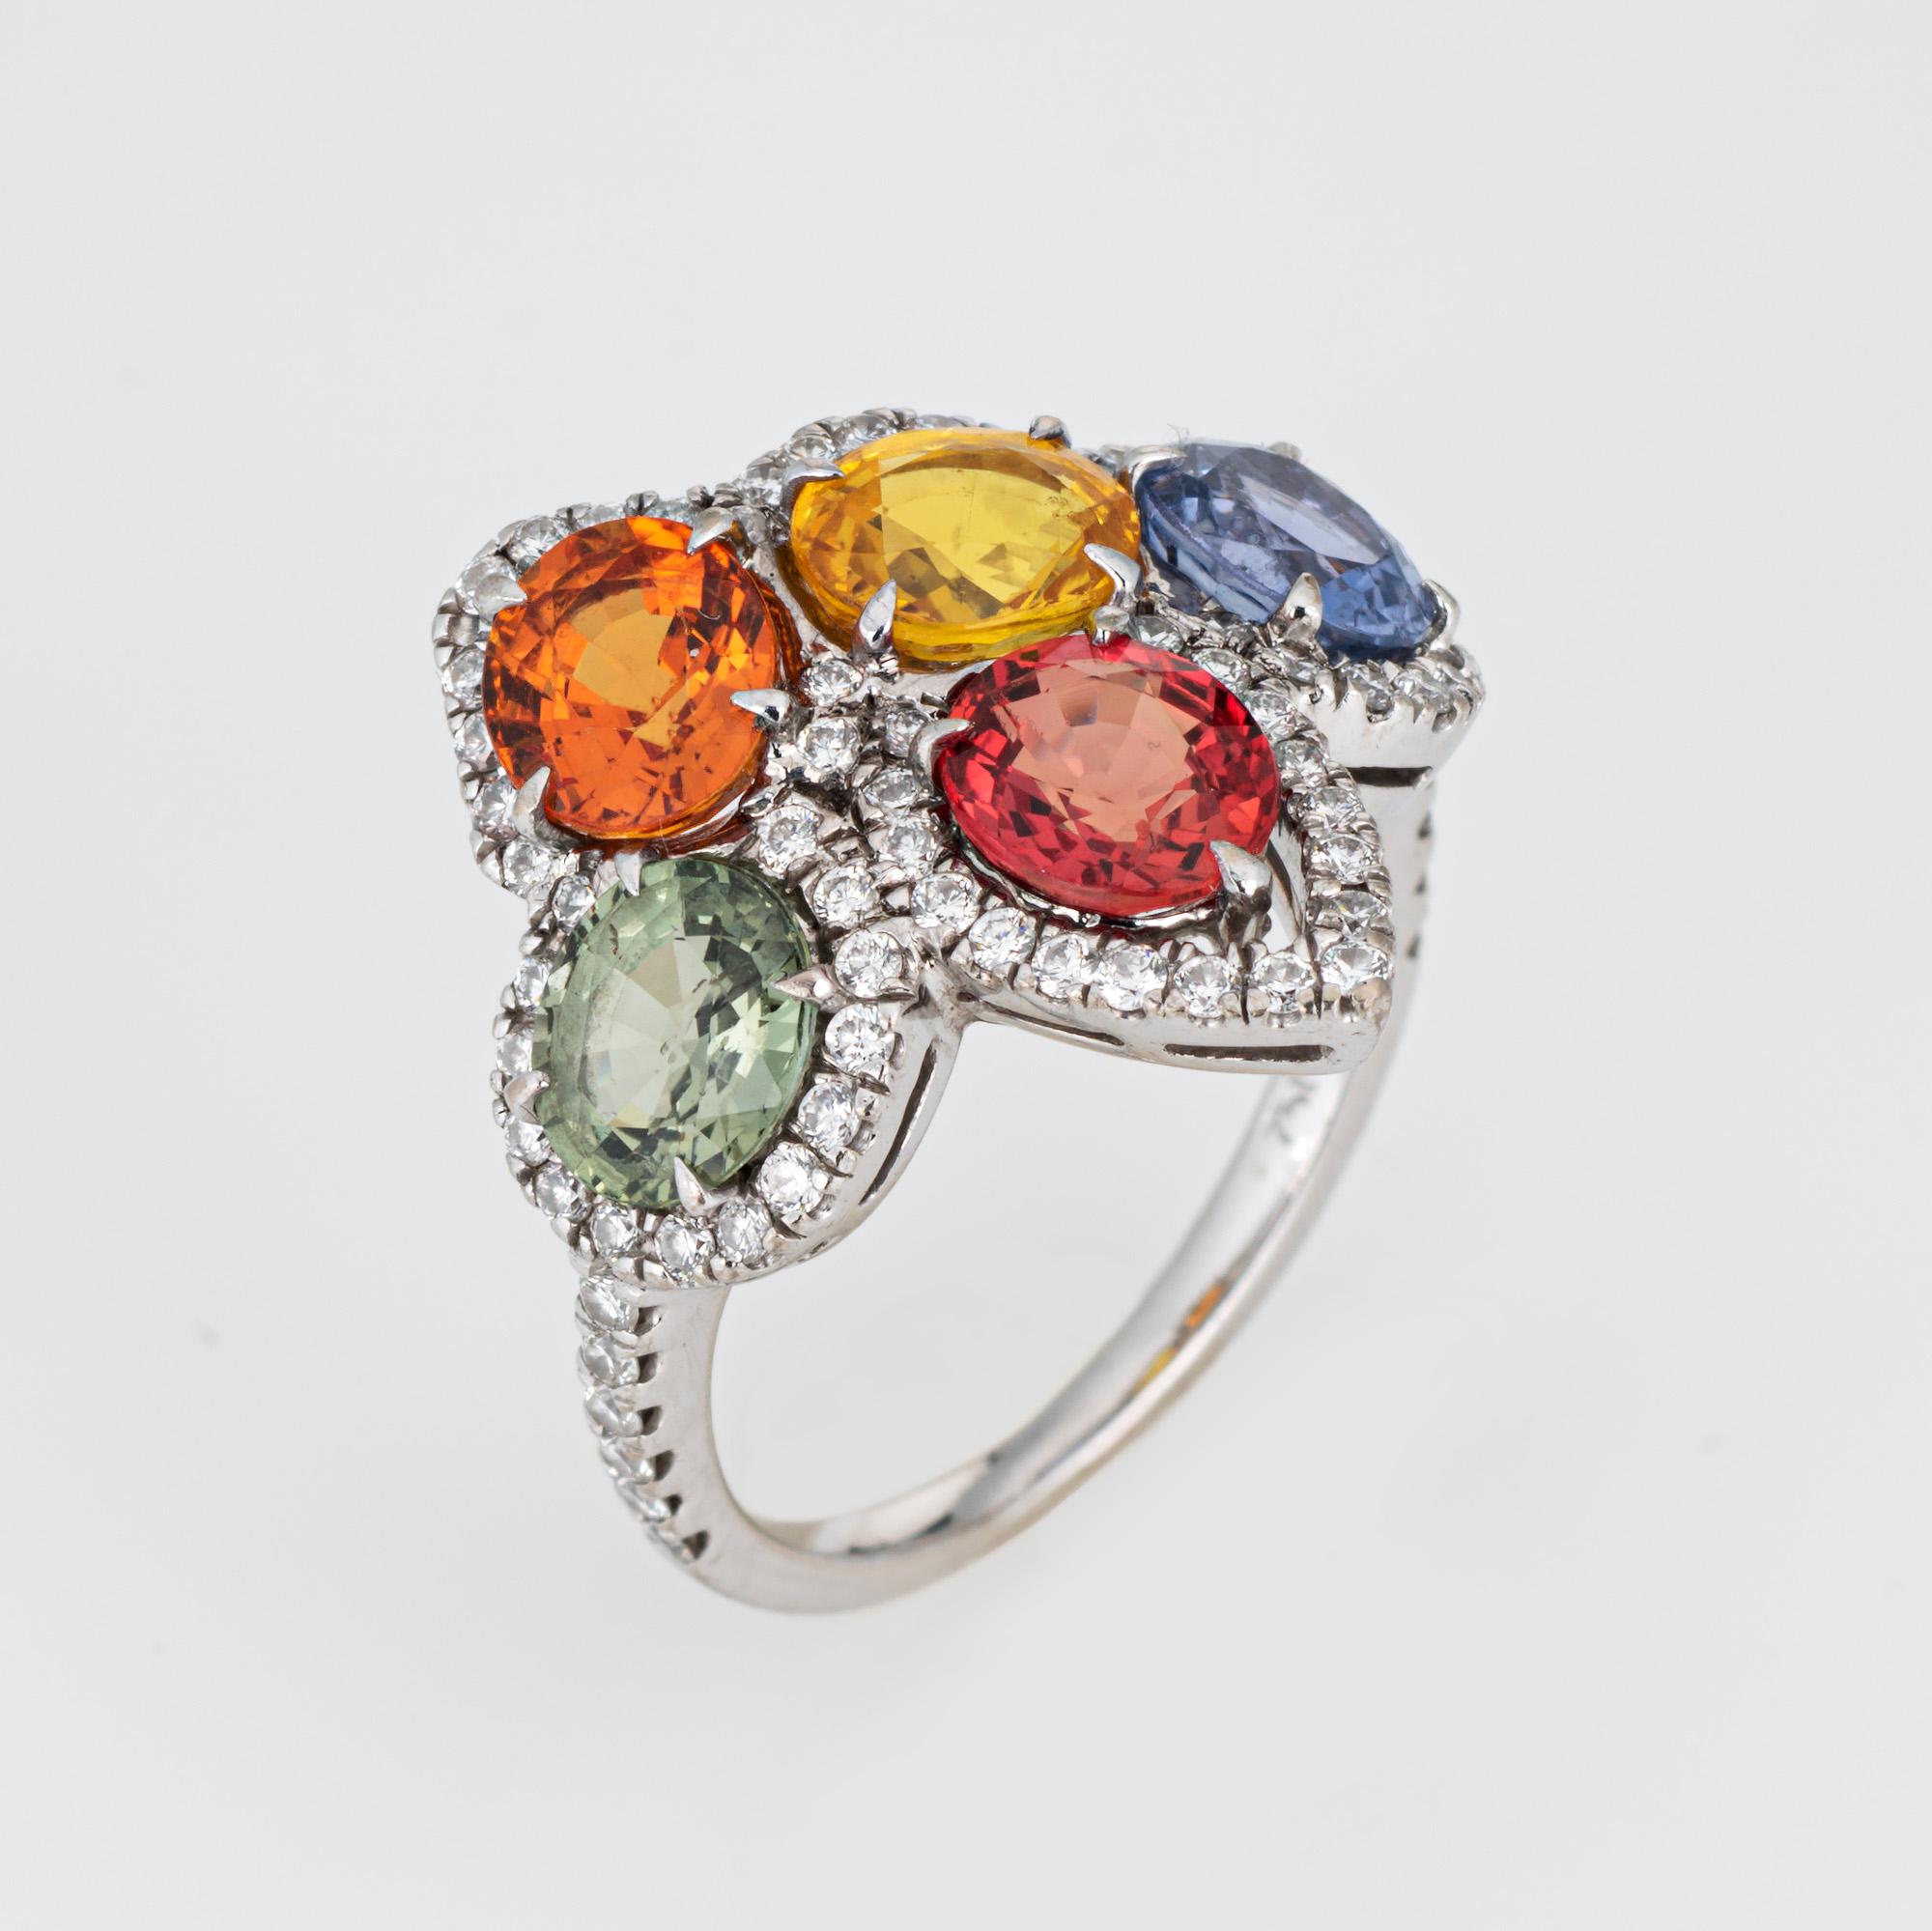 Finely detailed estate rainbow sapphire & diamond ring crafted in 18 karat white gold. 

Green, yellow, red, blue, and orange sapphires range in size from 5mm to 6mm. 70 full cut diamonds total an estimated 0.35 carats (estimated at H-I color and